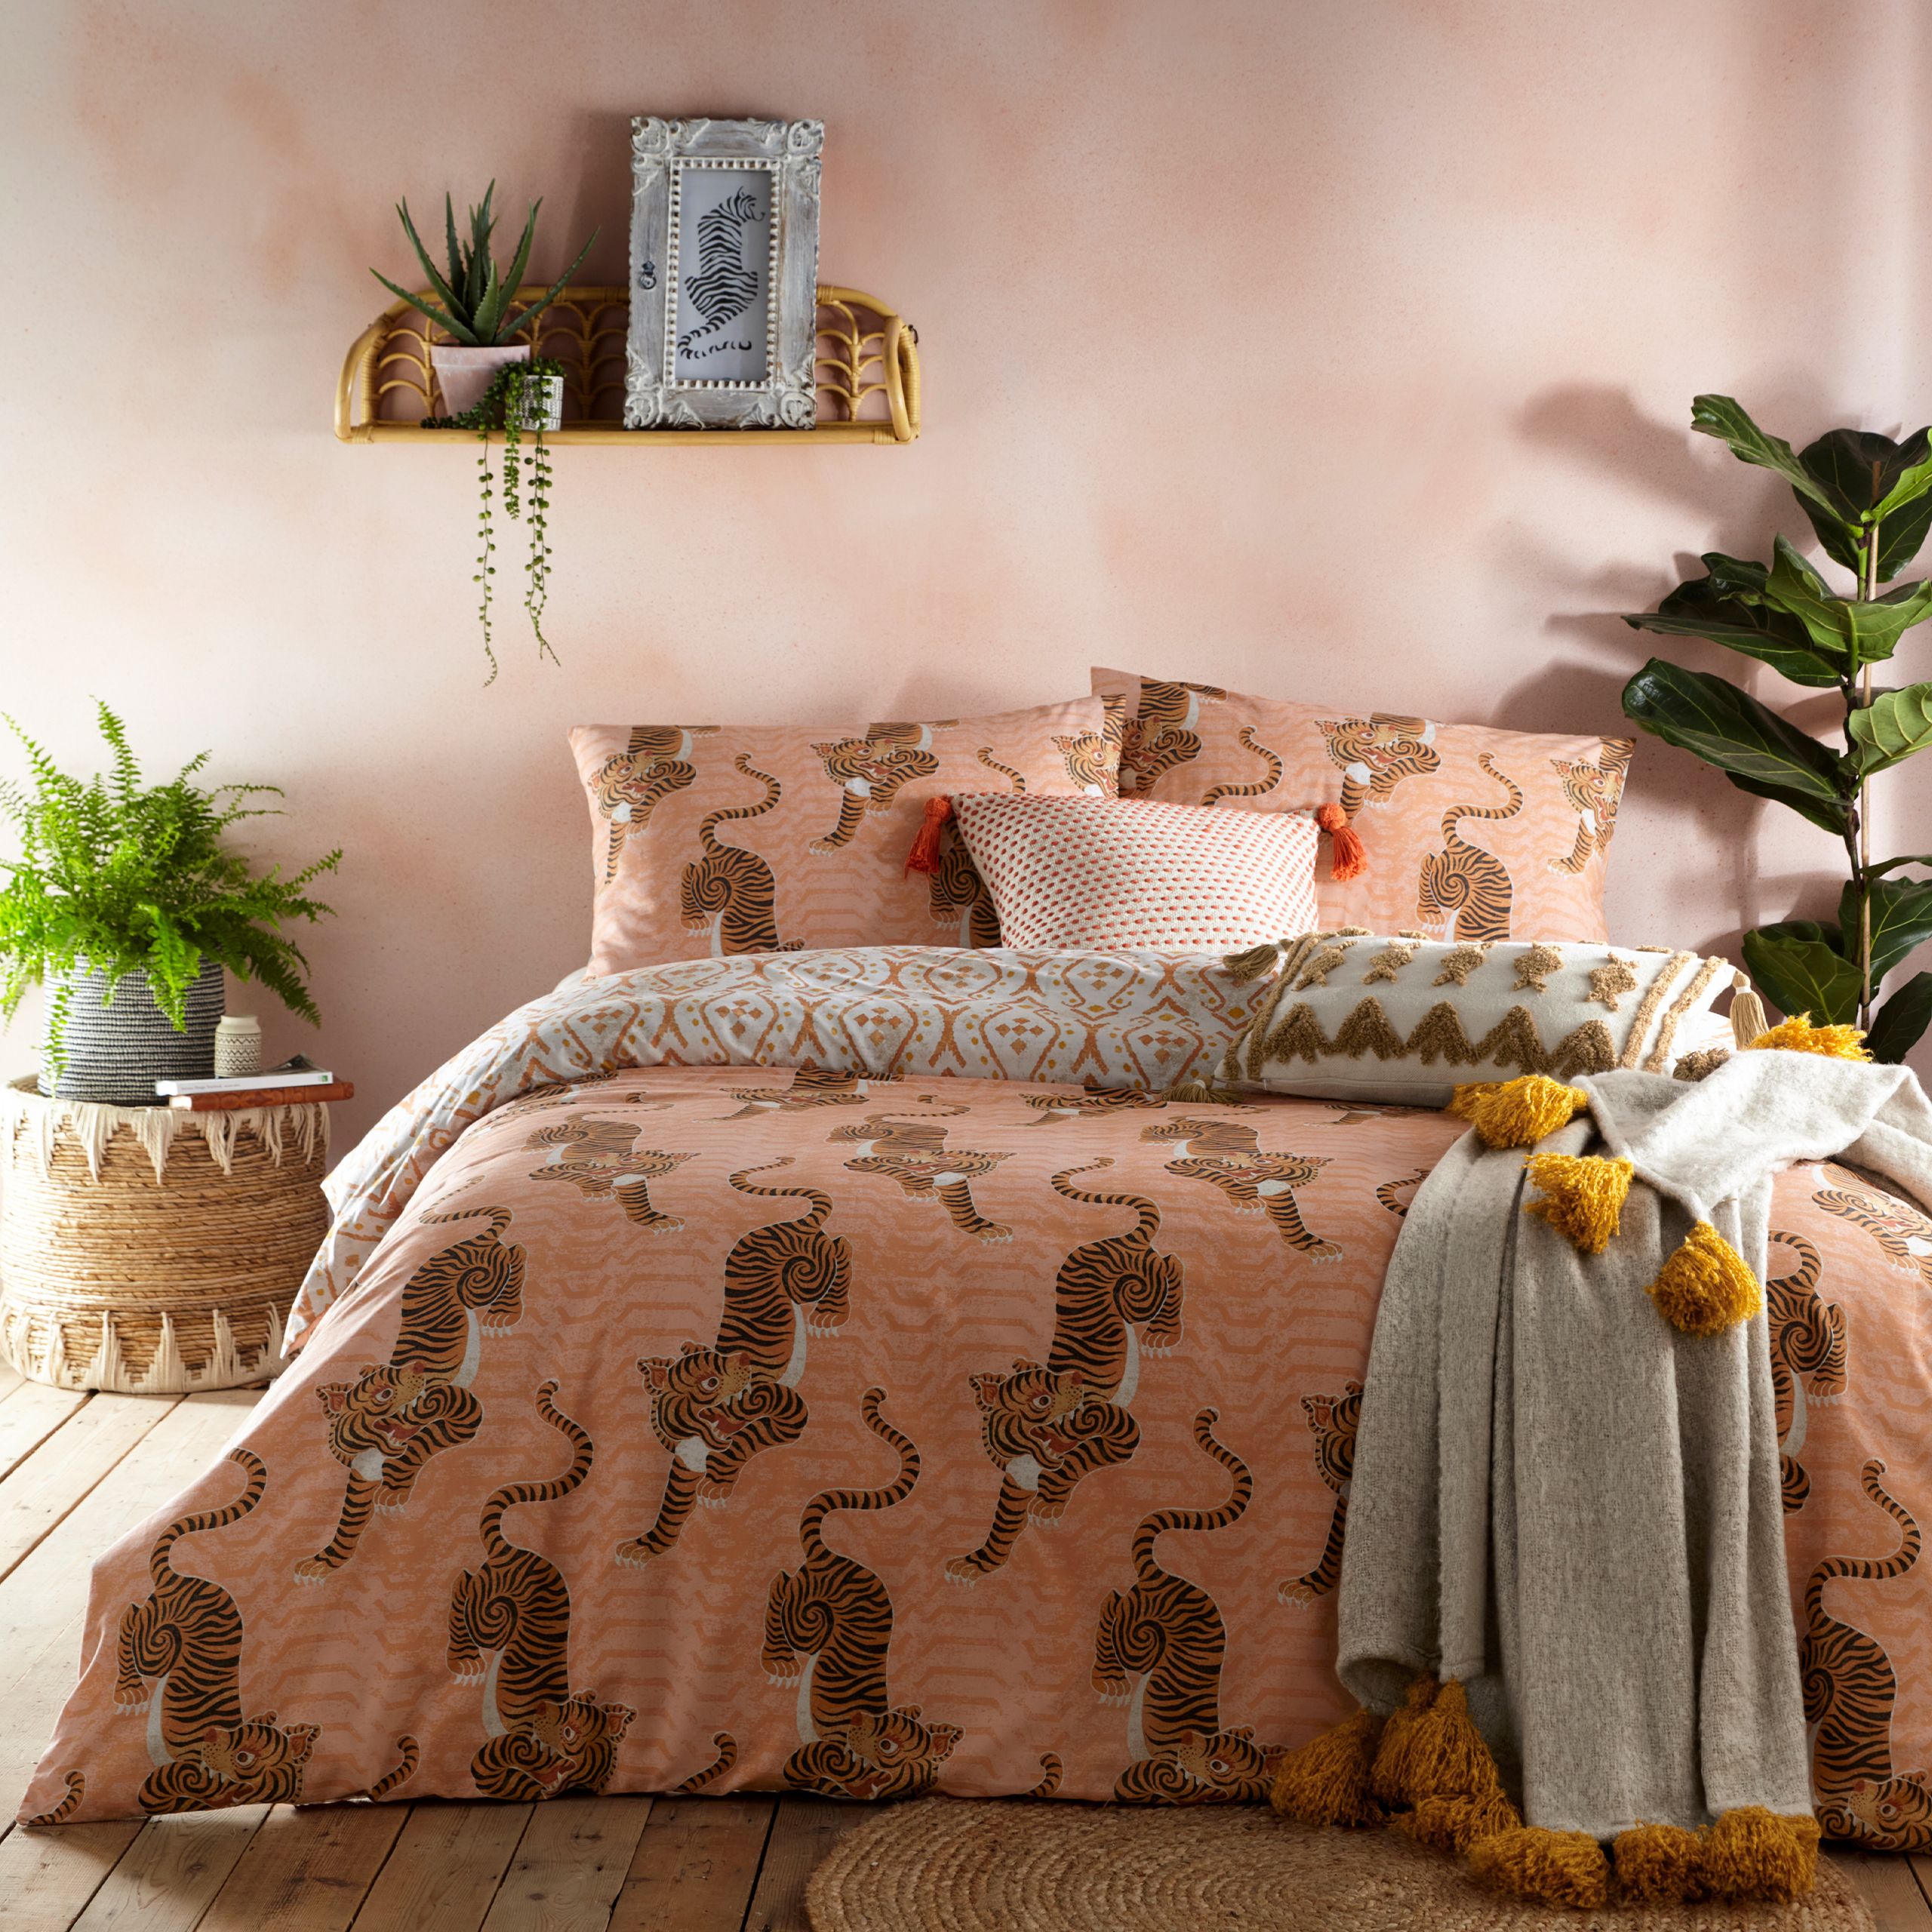 Add instant personality into your bedroom with this showstopping Tibetan Tiger bedding, featuring tribal-inspired prints and crawling tigers. Fully reversible design, so you can switch the look when you need to.